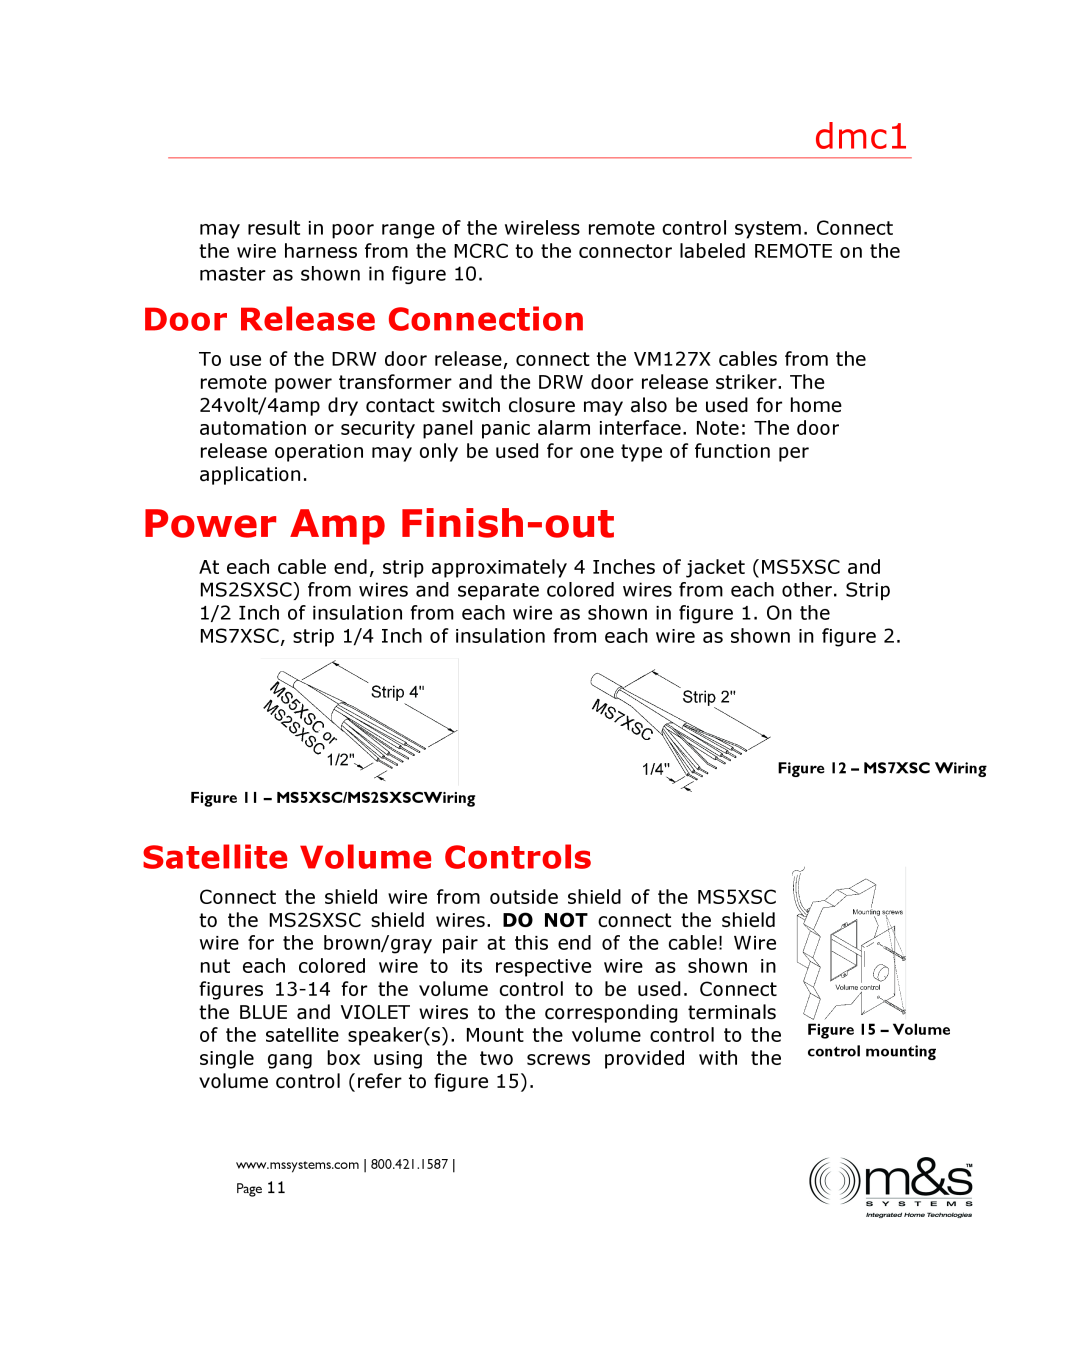 M&S Systems dmc1 manual Power Amp Finish-out, Door Release Connection, Satellite Volume Controls 